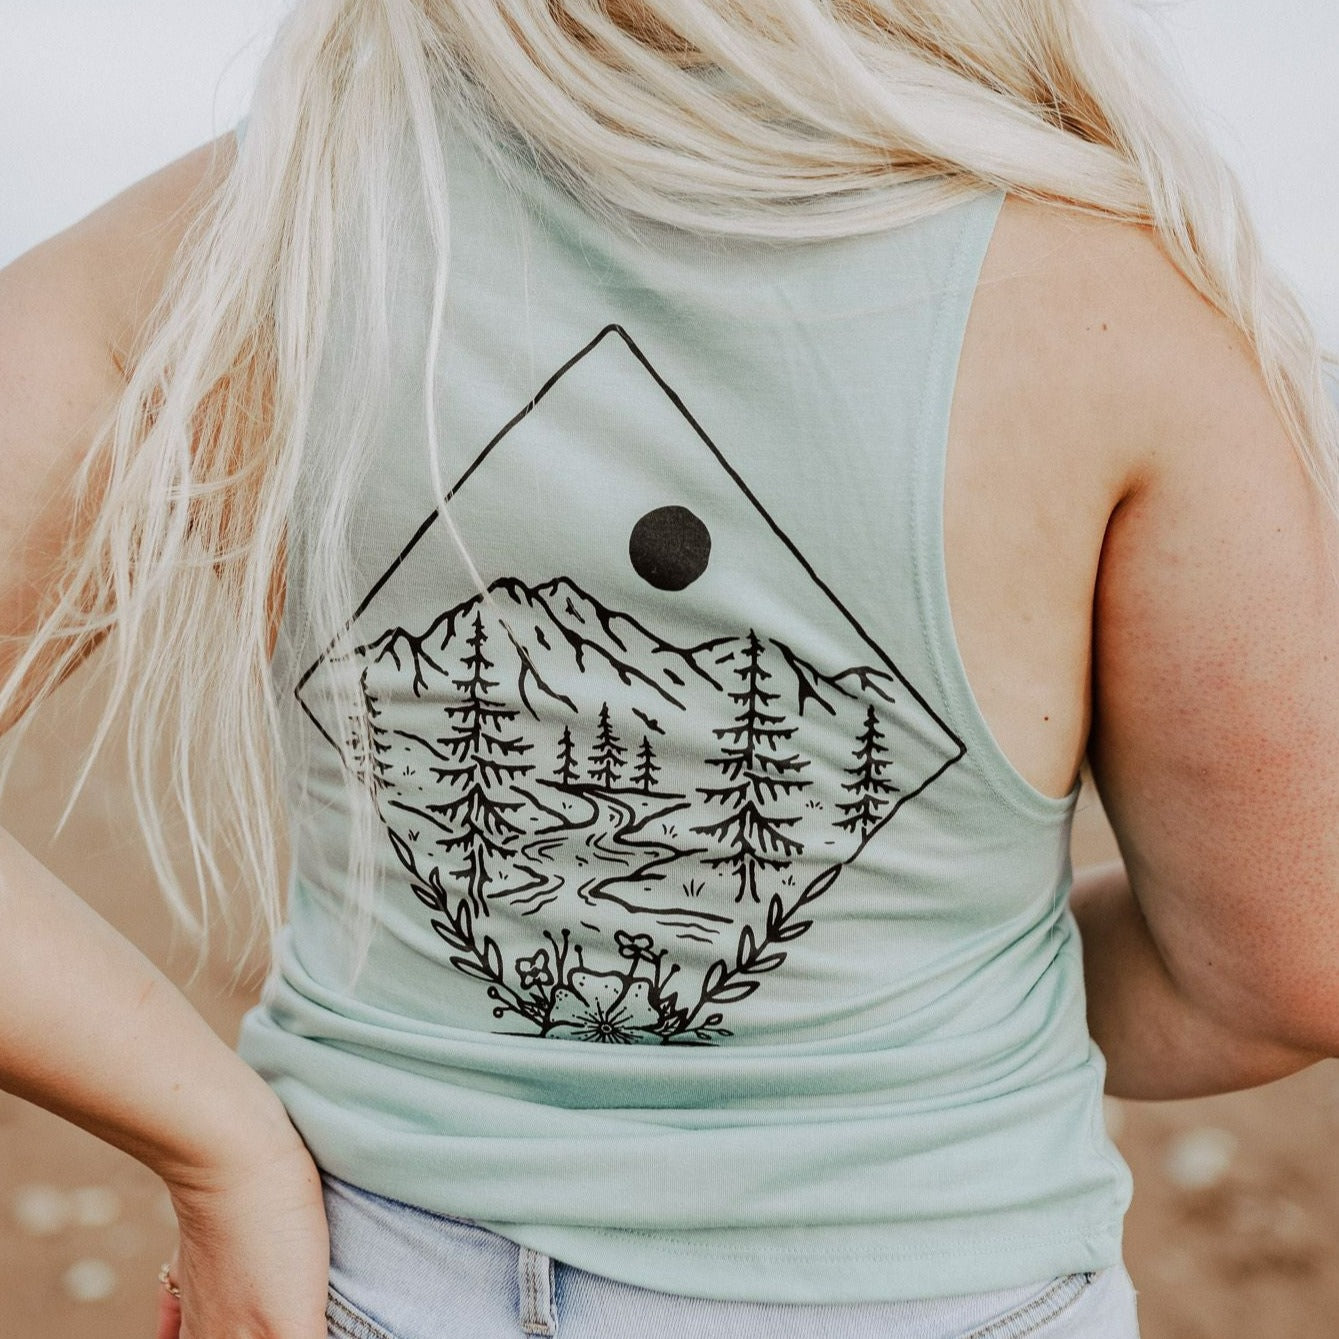 DON'T LET YESTERDAY TAKE UP TOO MUCH OF TODAY.' Women's Flowy Tank